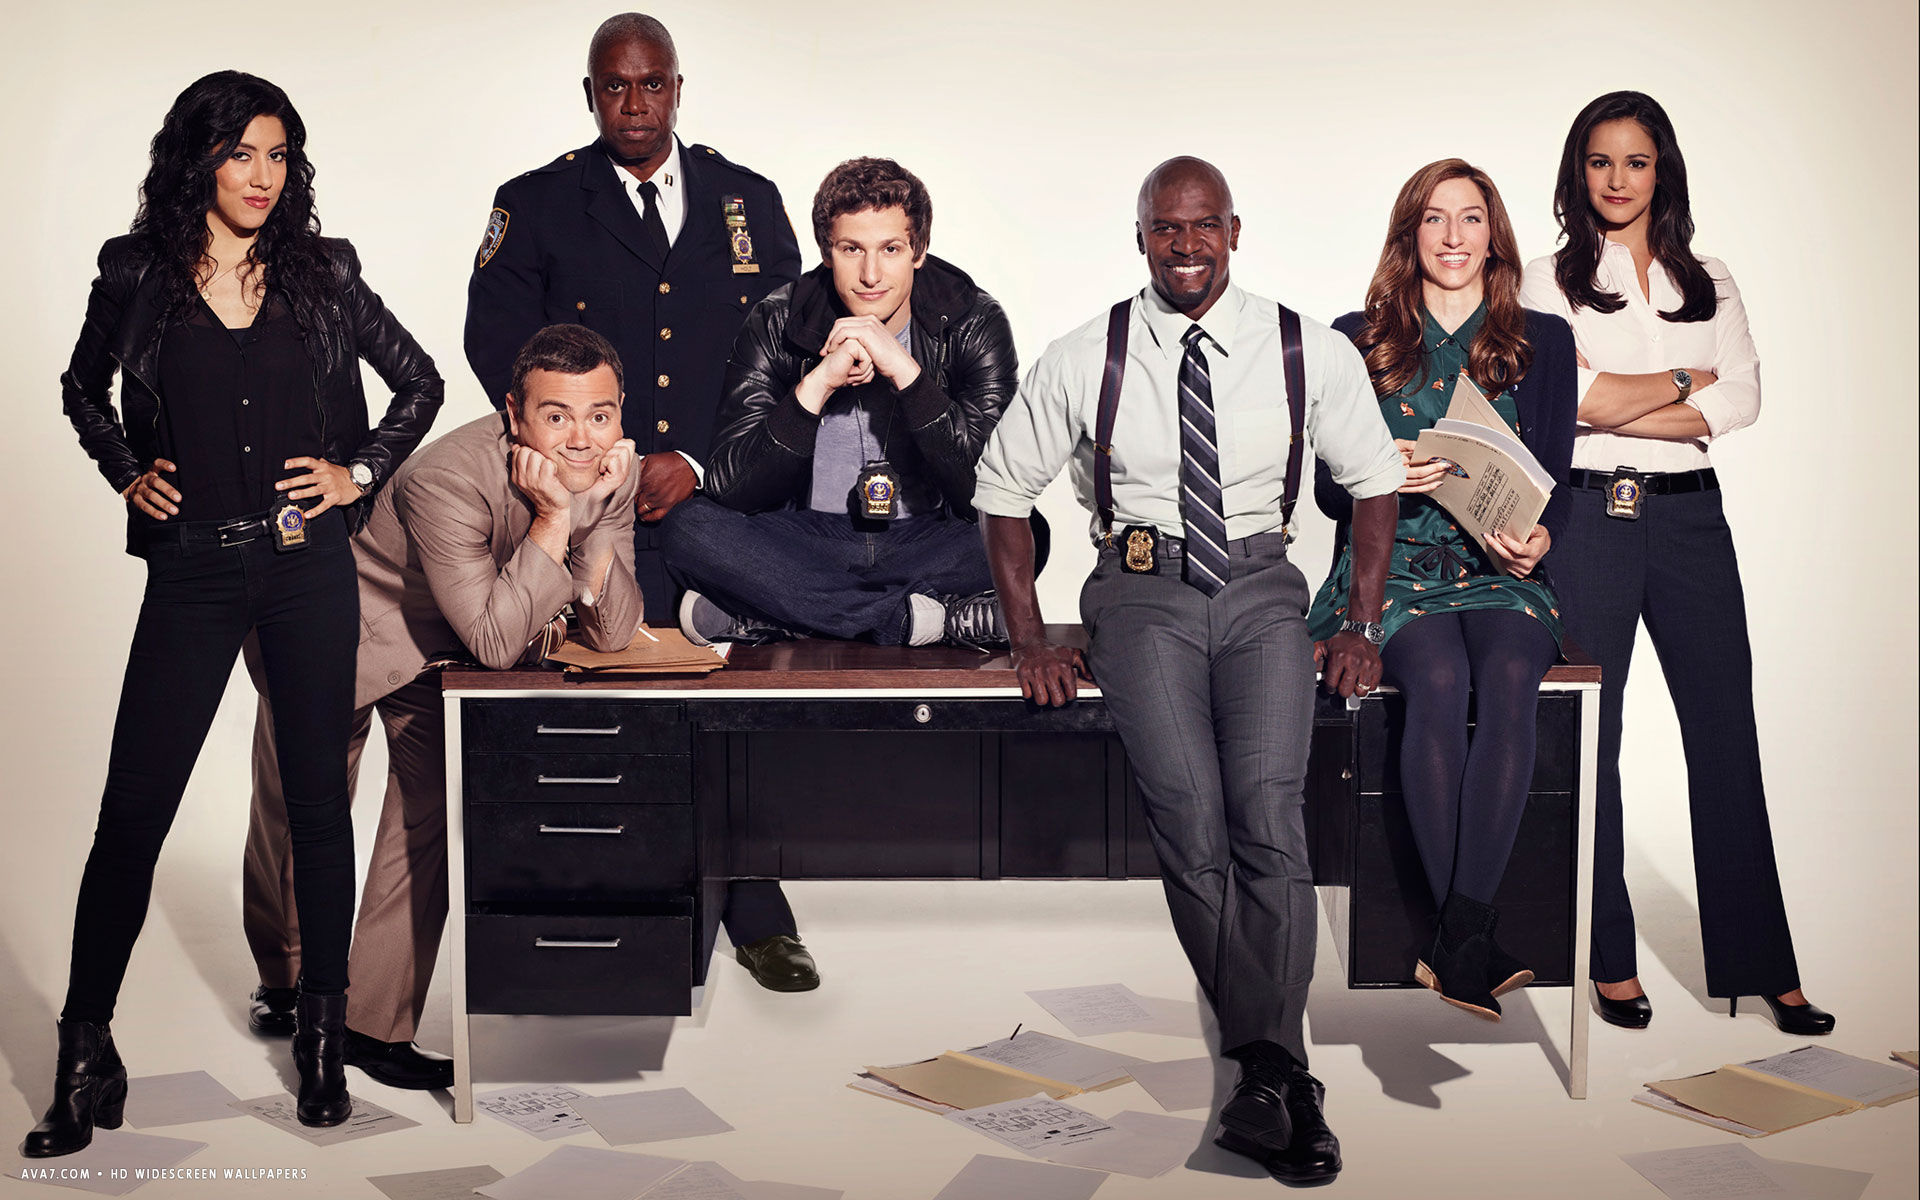 Brooklyn Nine-Nine (TV Series): Sitcom won 2 Primetime Emmys, 17 Wins and 130 nominations total. 1920x1200 HD Background.